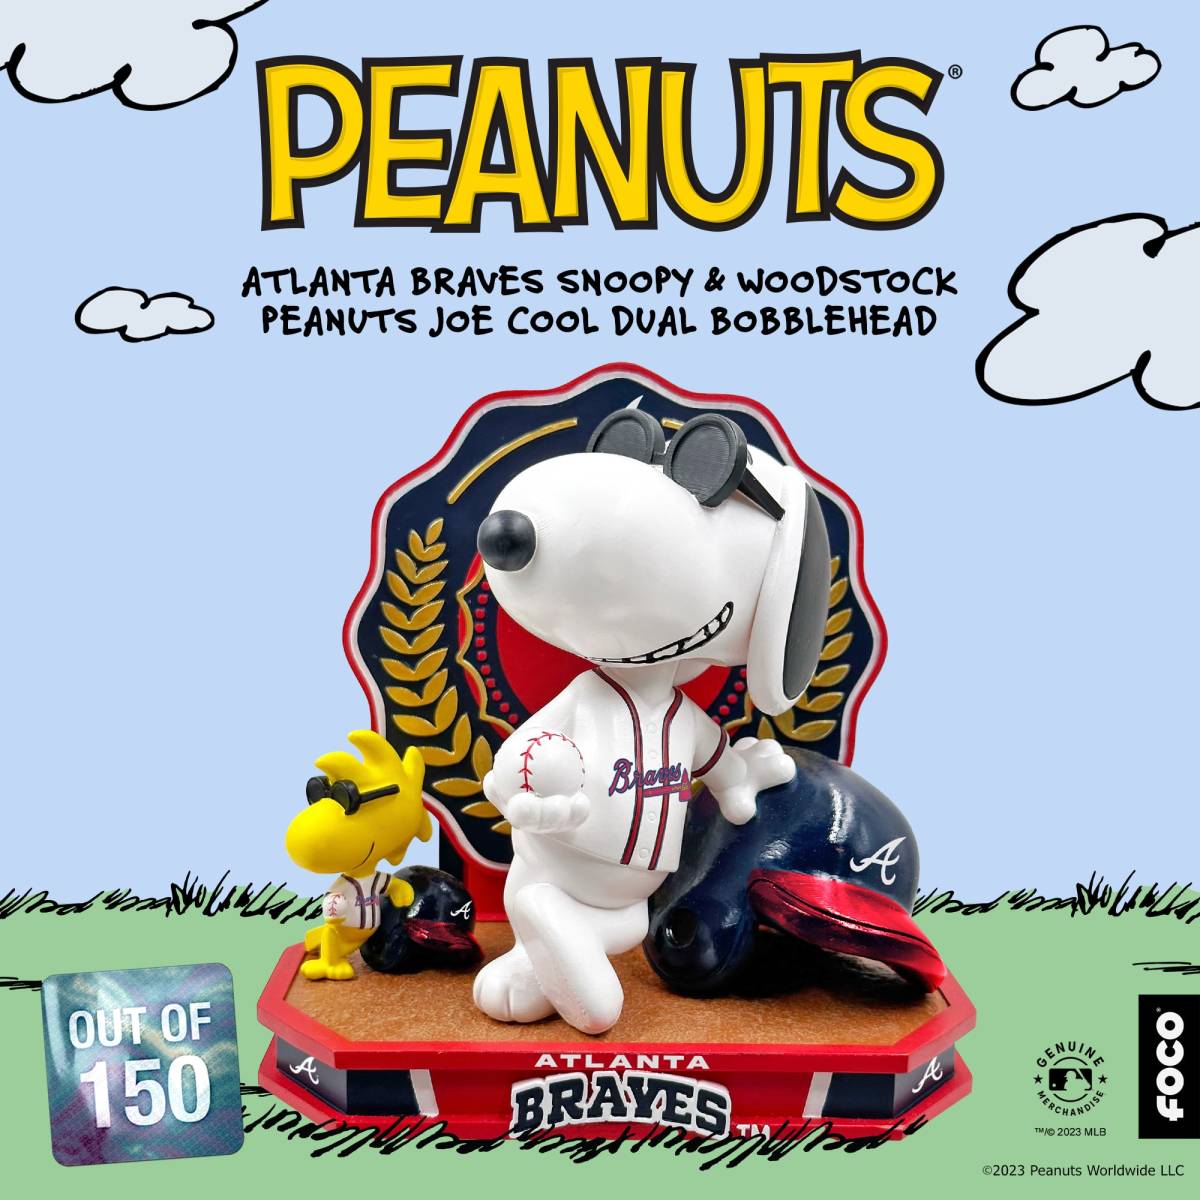 Launch You'll Love: The Coach x Peanuts Collection